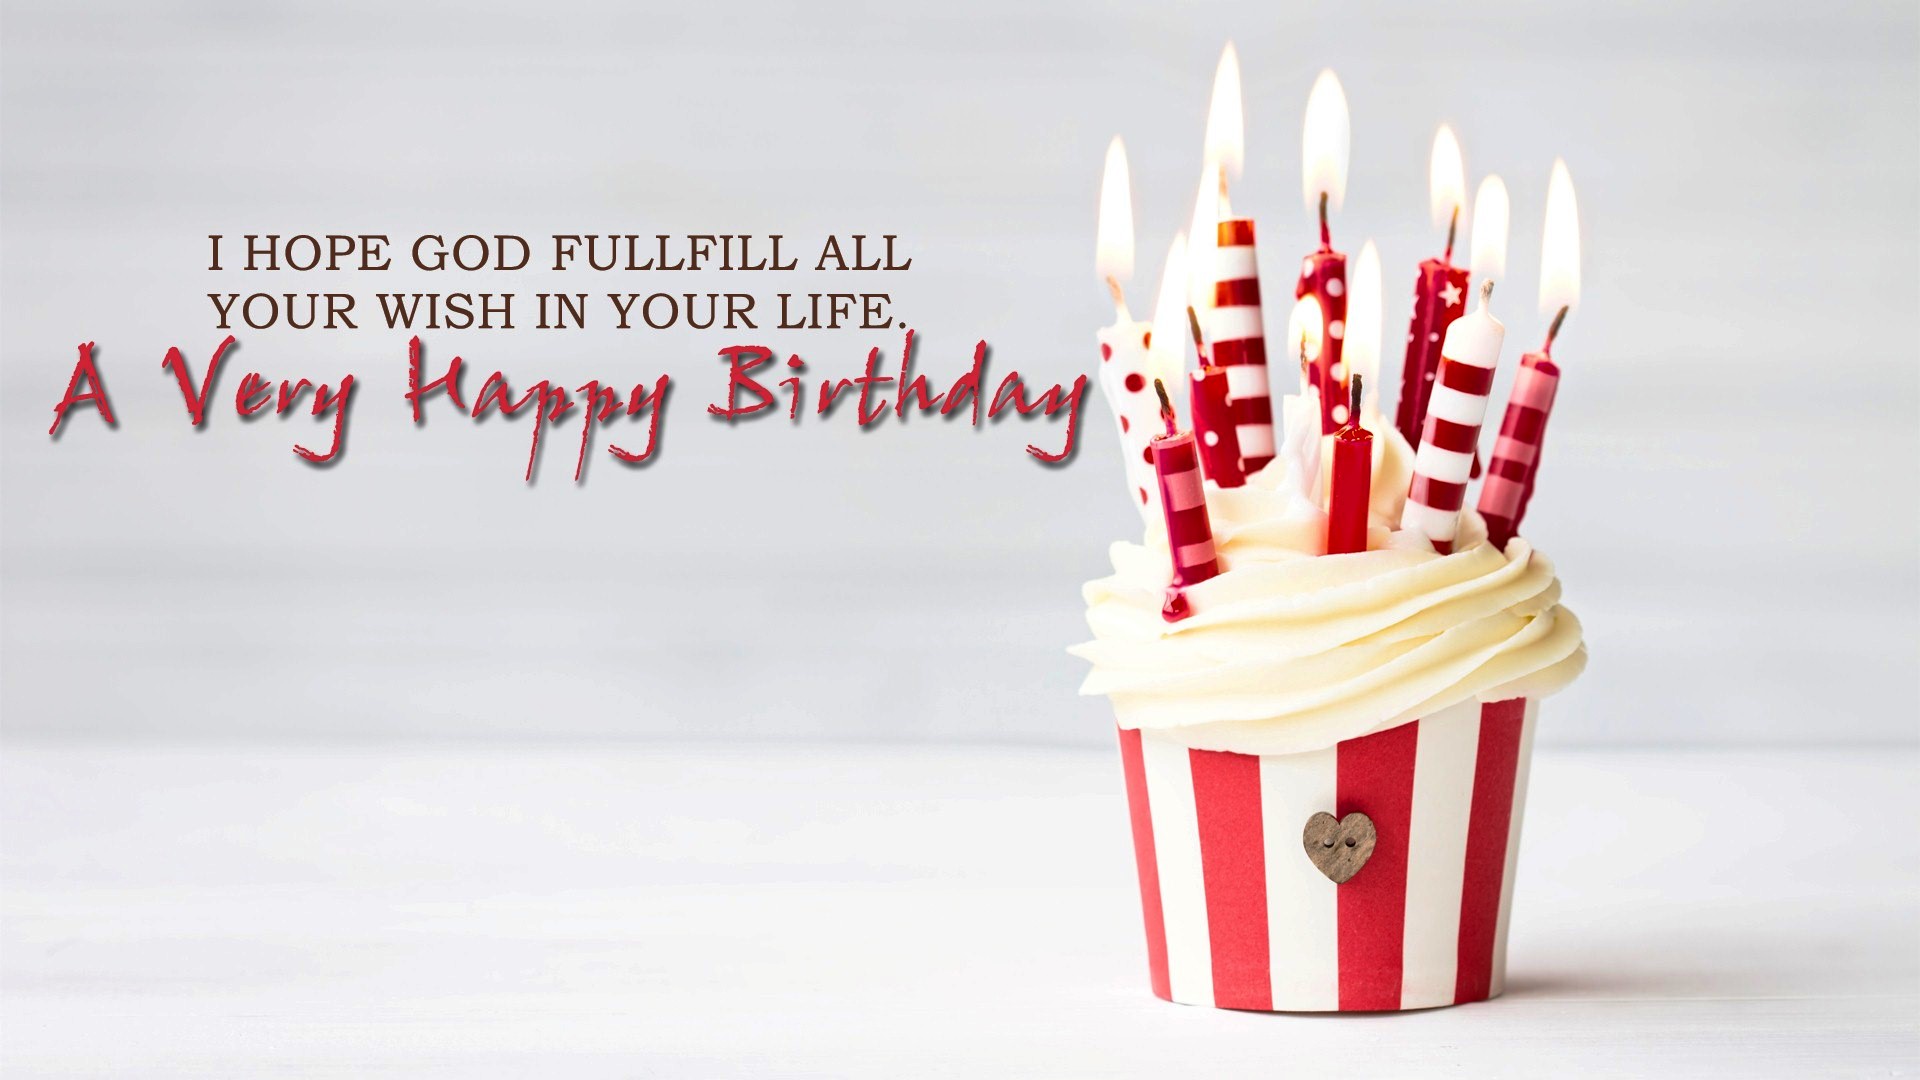 Happy Birthday Images Hd With Quotes - Happy Birthday Wishes Quotes Hd -  1920x1080 Wallpaper 